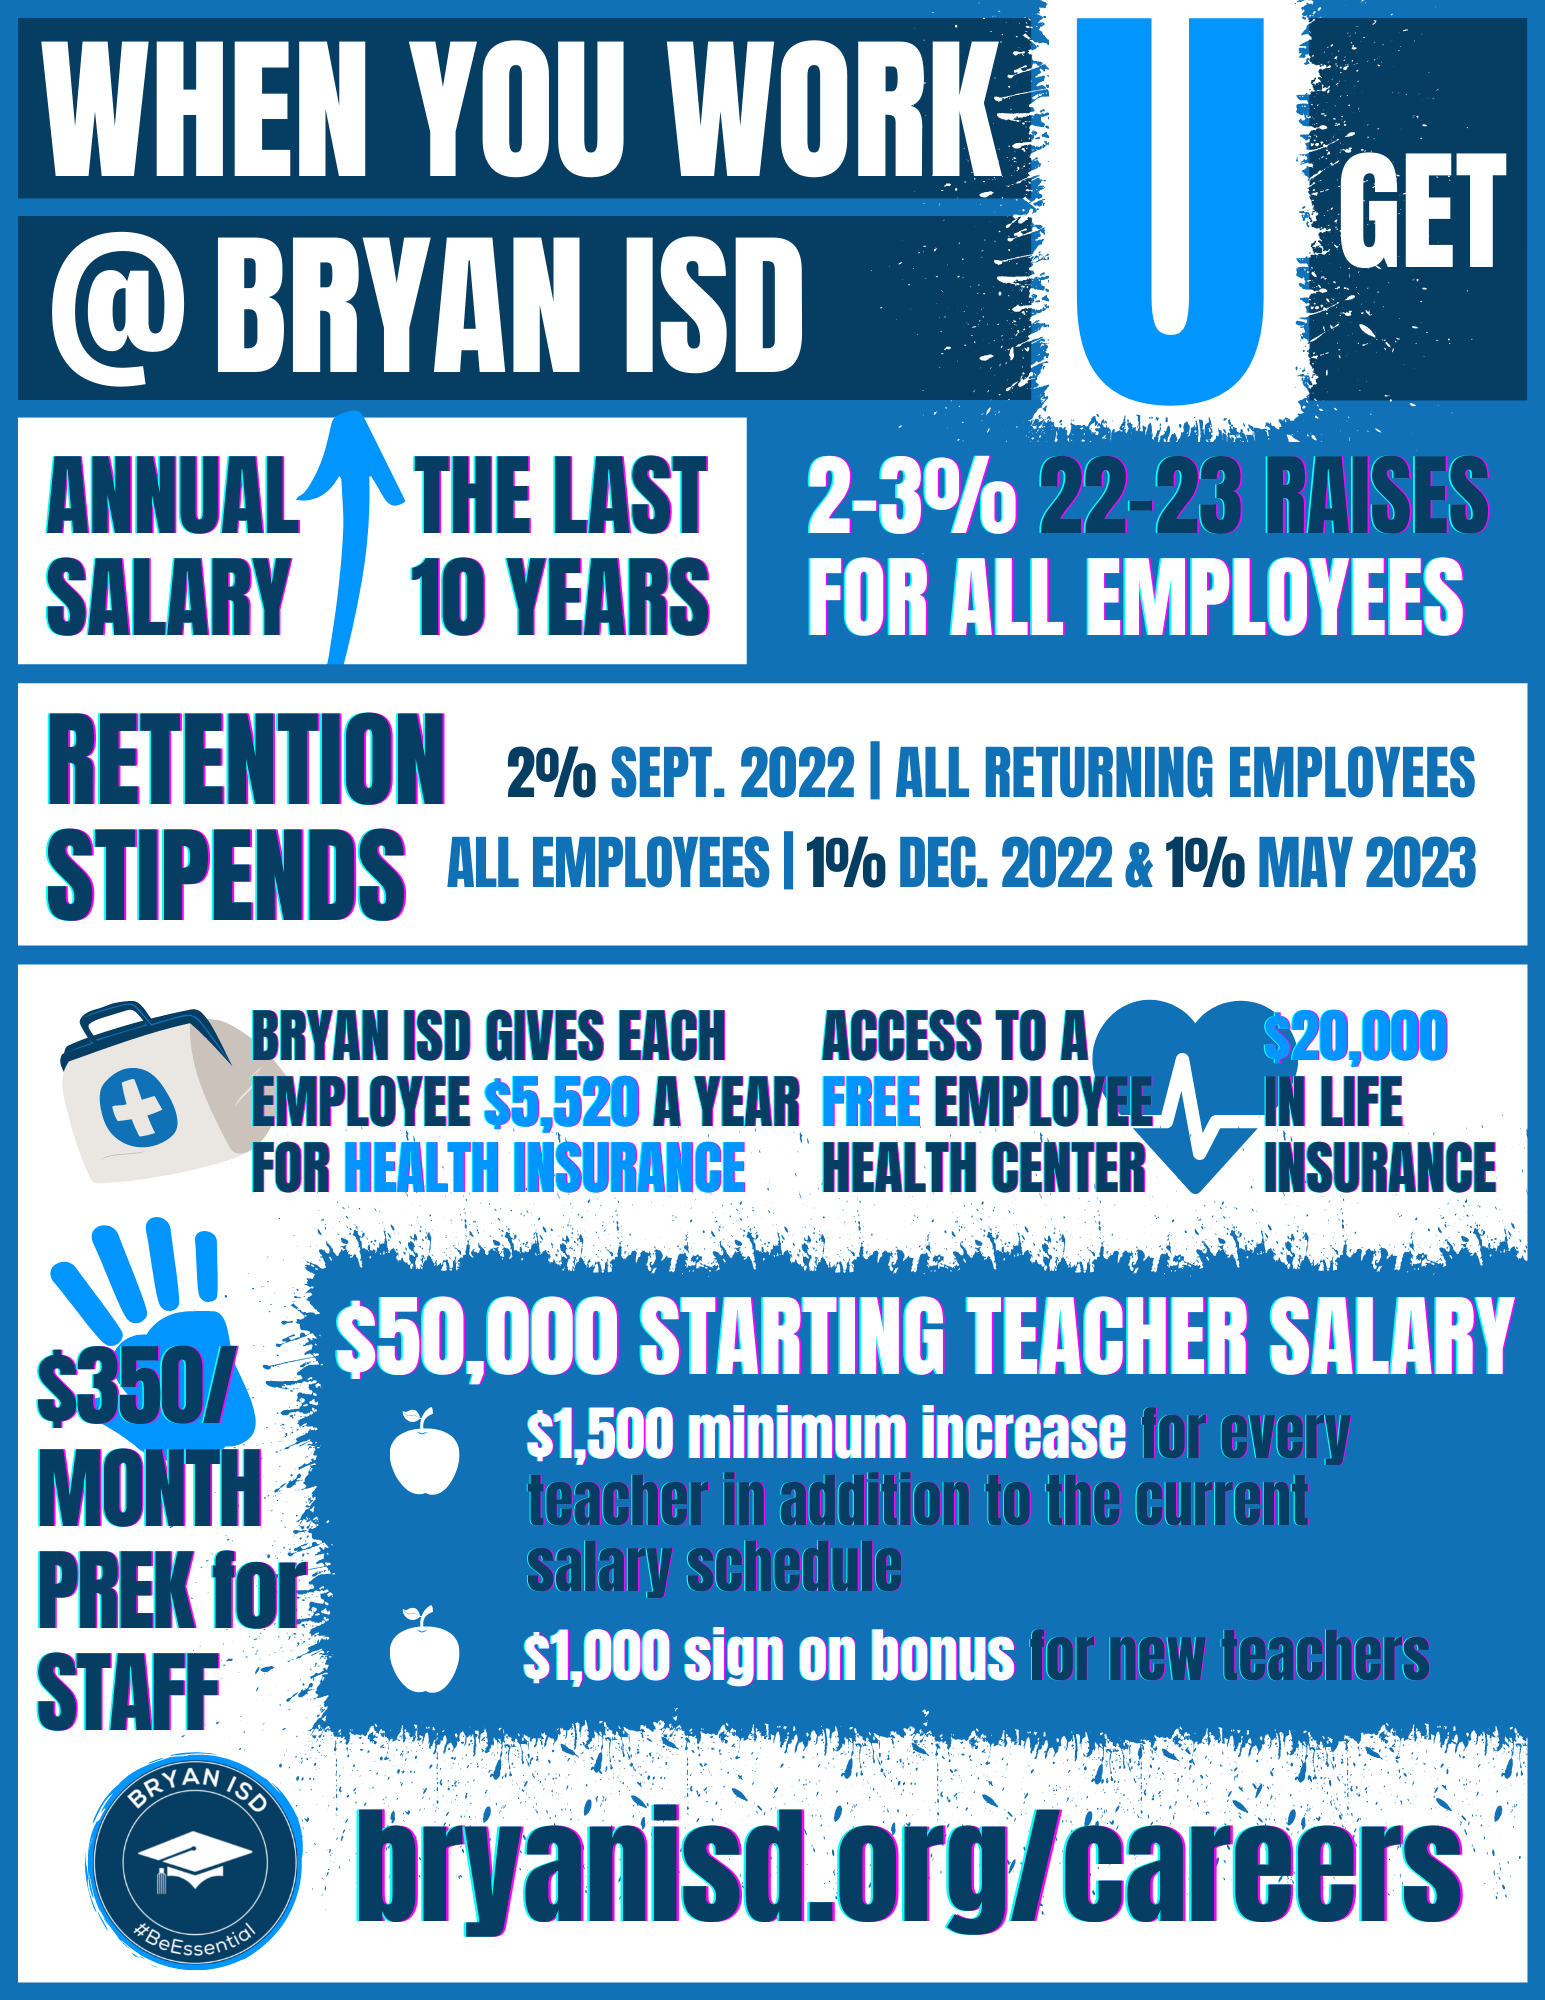 Working in Bryan ISD Flyer